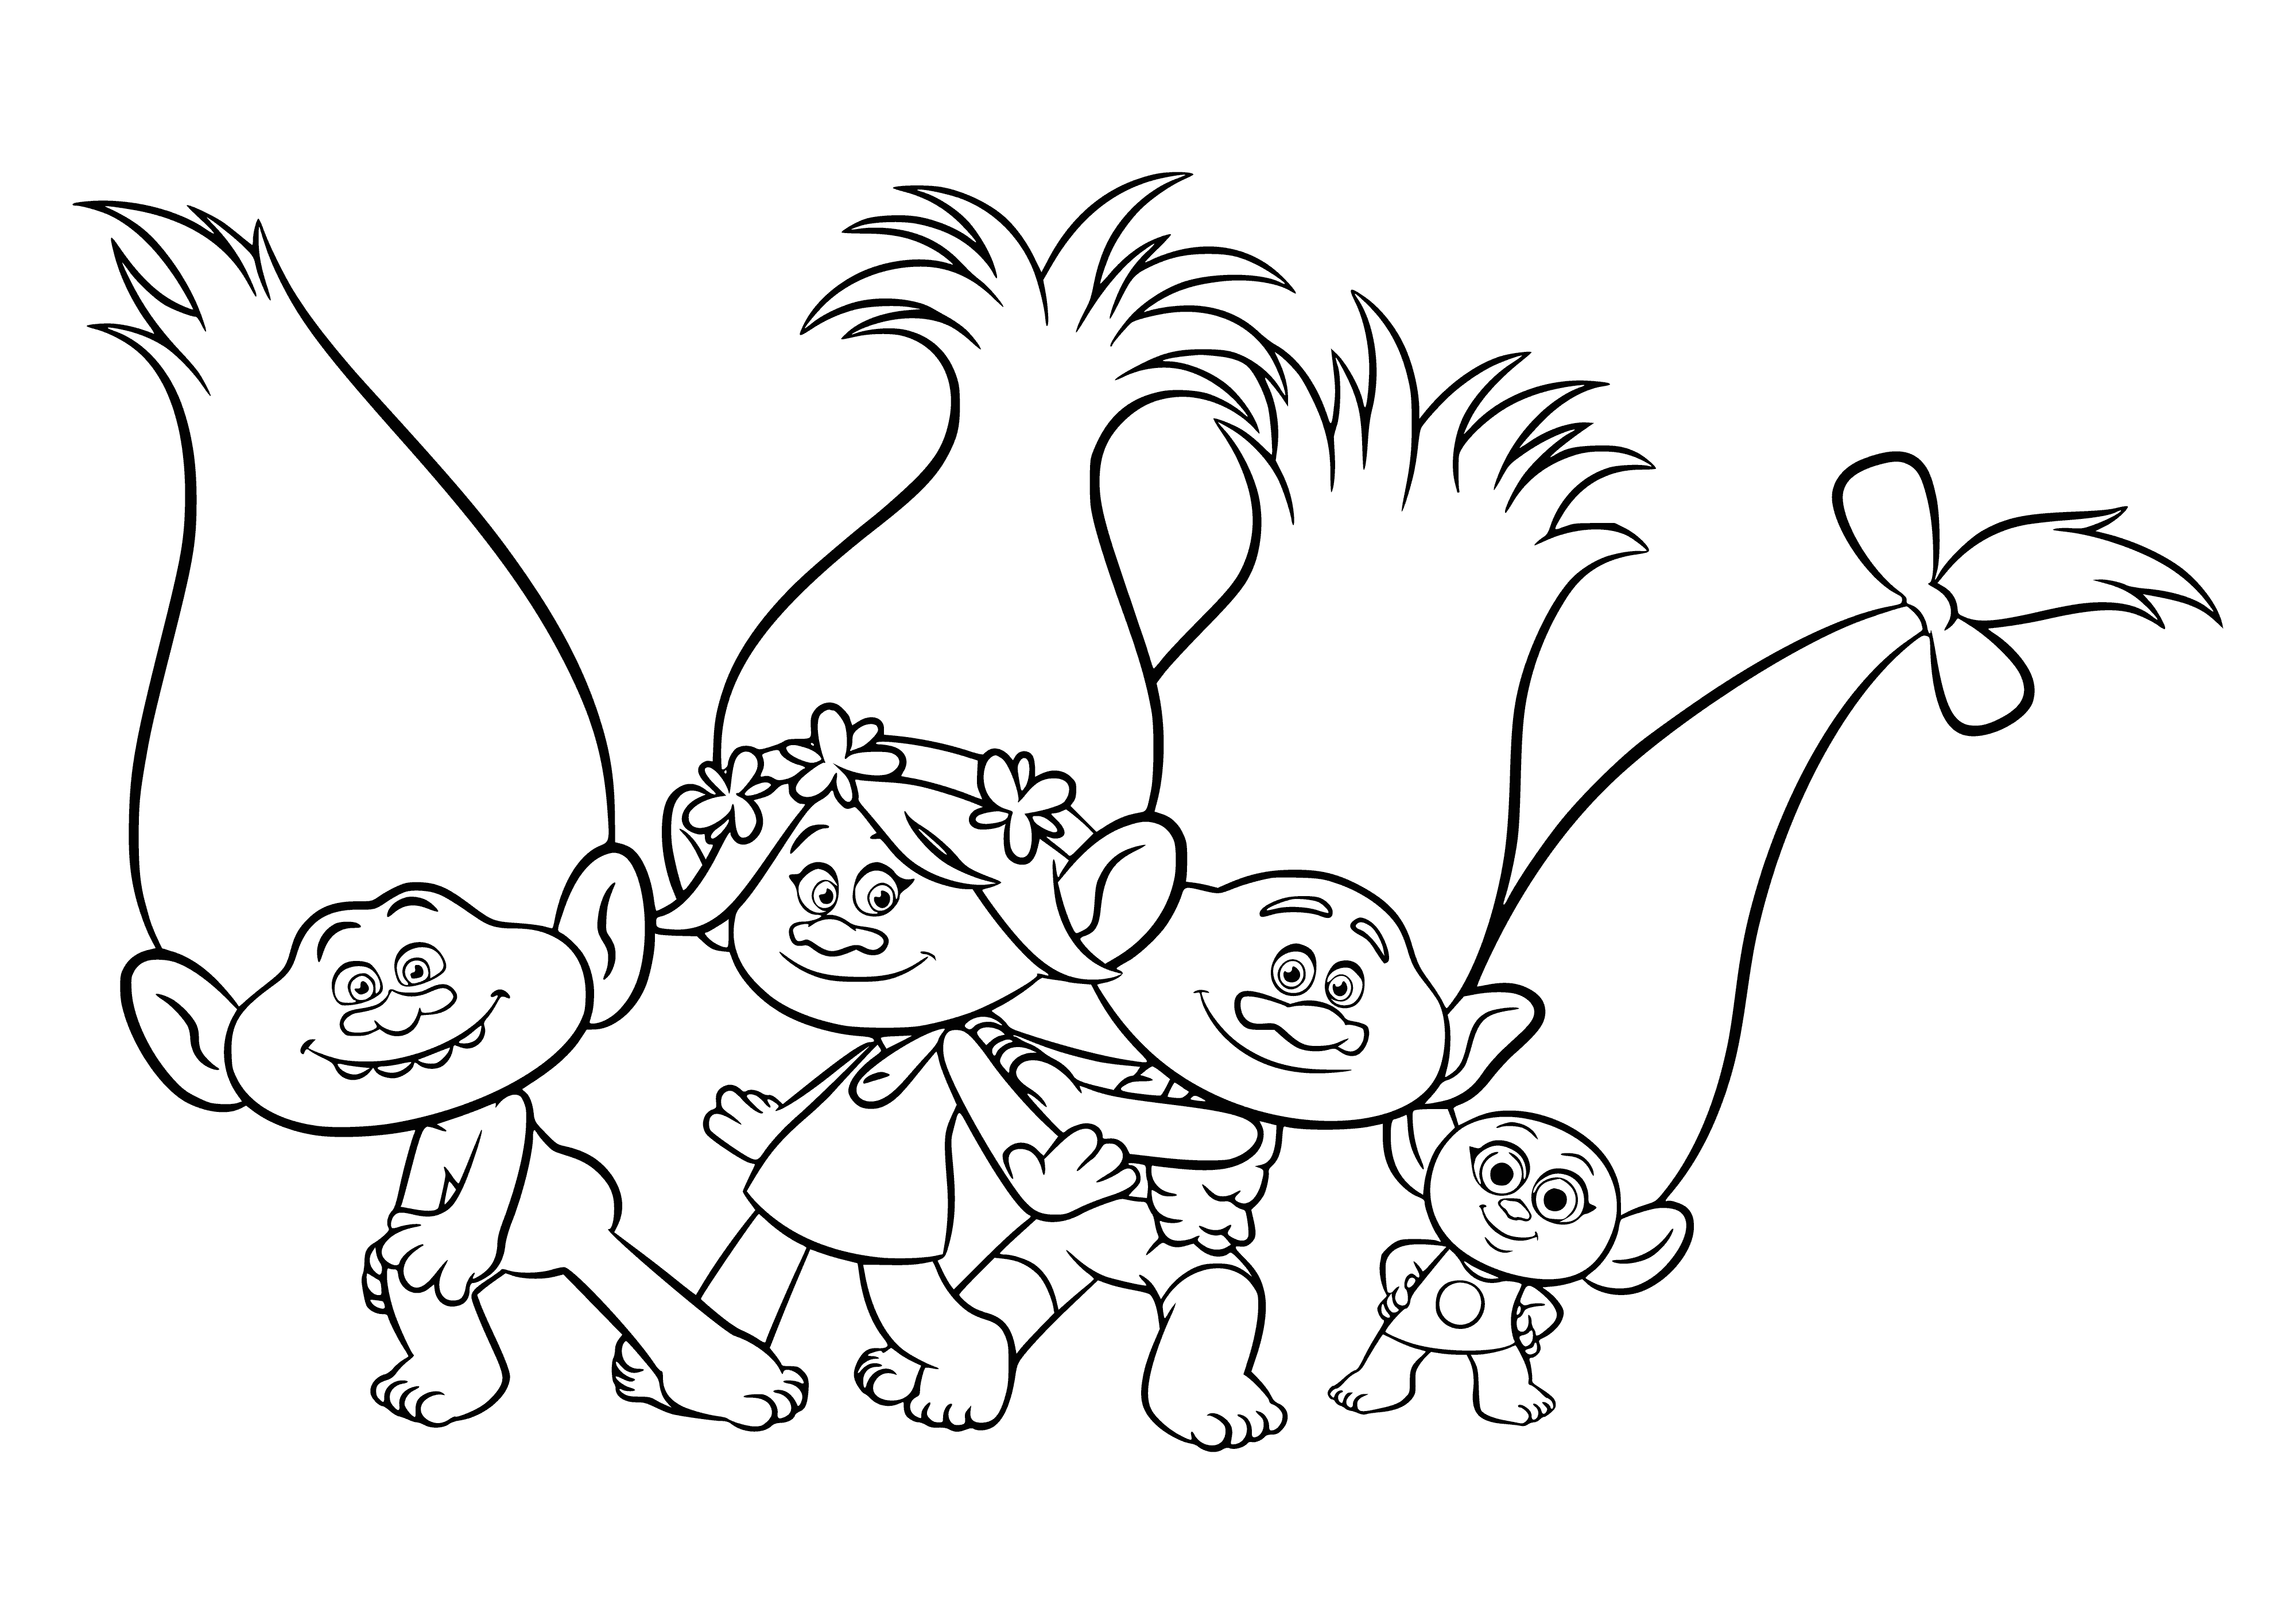 coloring page: Five trolls in line, smiling, wearing different colored clothes, orange hair, yellow eyes, big noses. #coloringpage